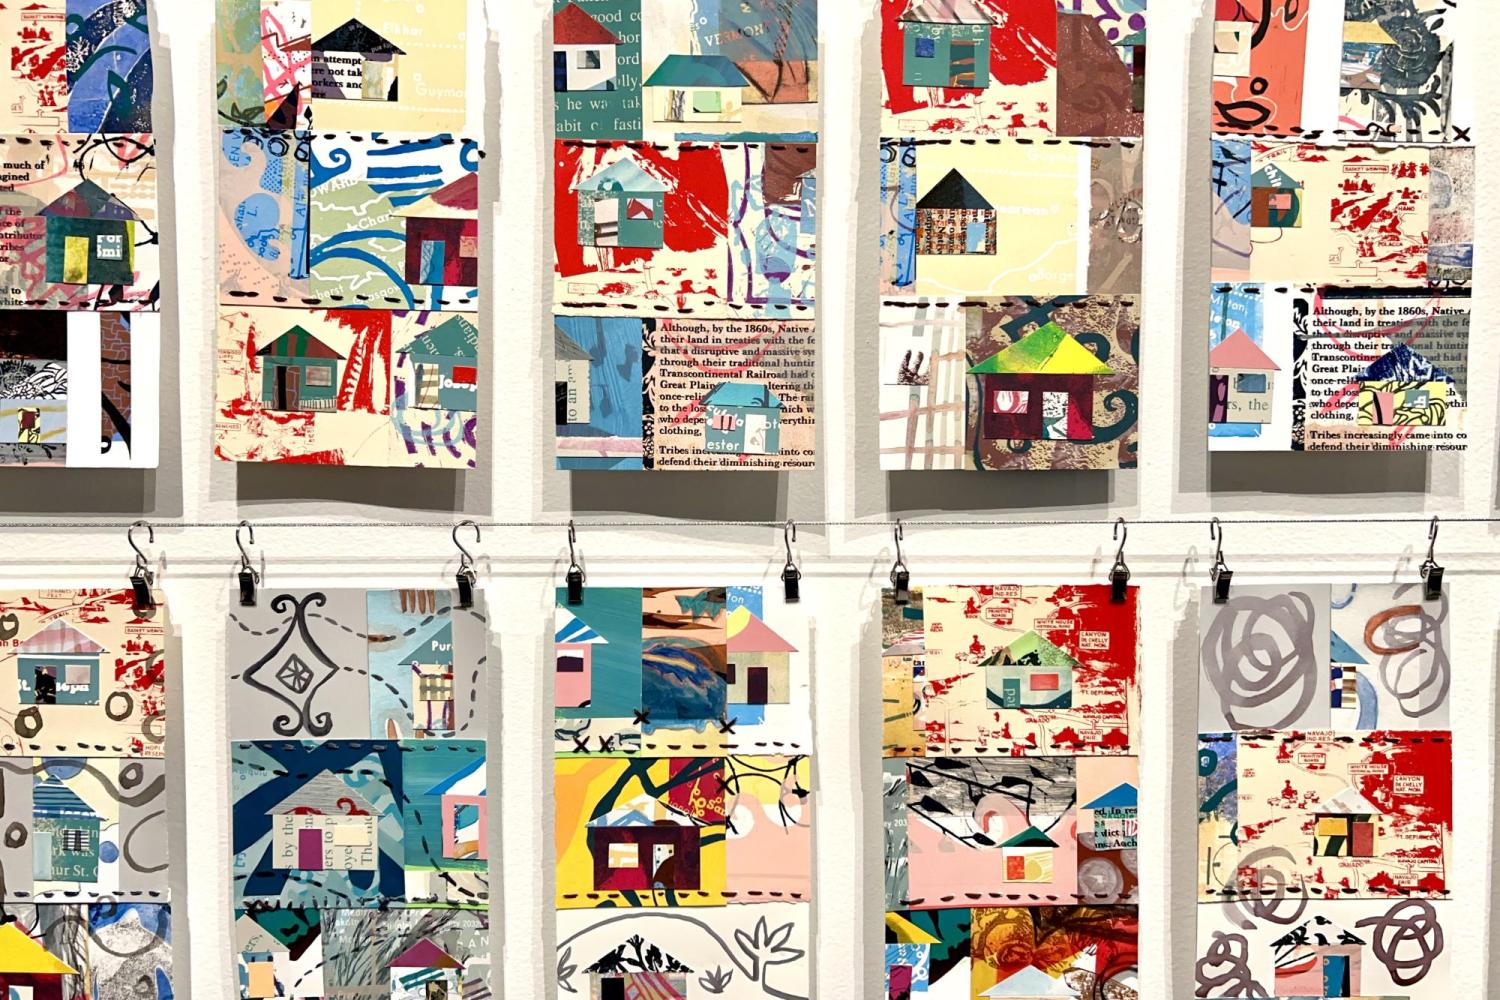 Many rectangular pages of collaged paper with colorful houses, other designs and text clipped to a metal line and hanging in front of a white wall.